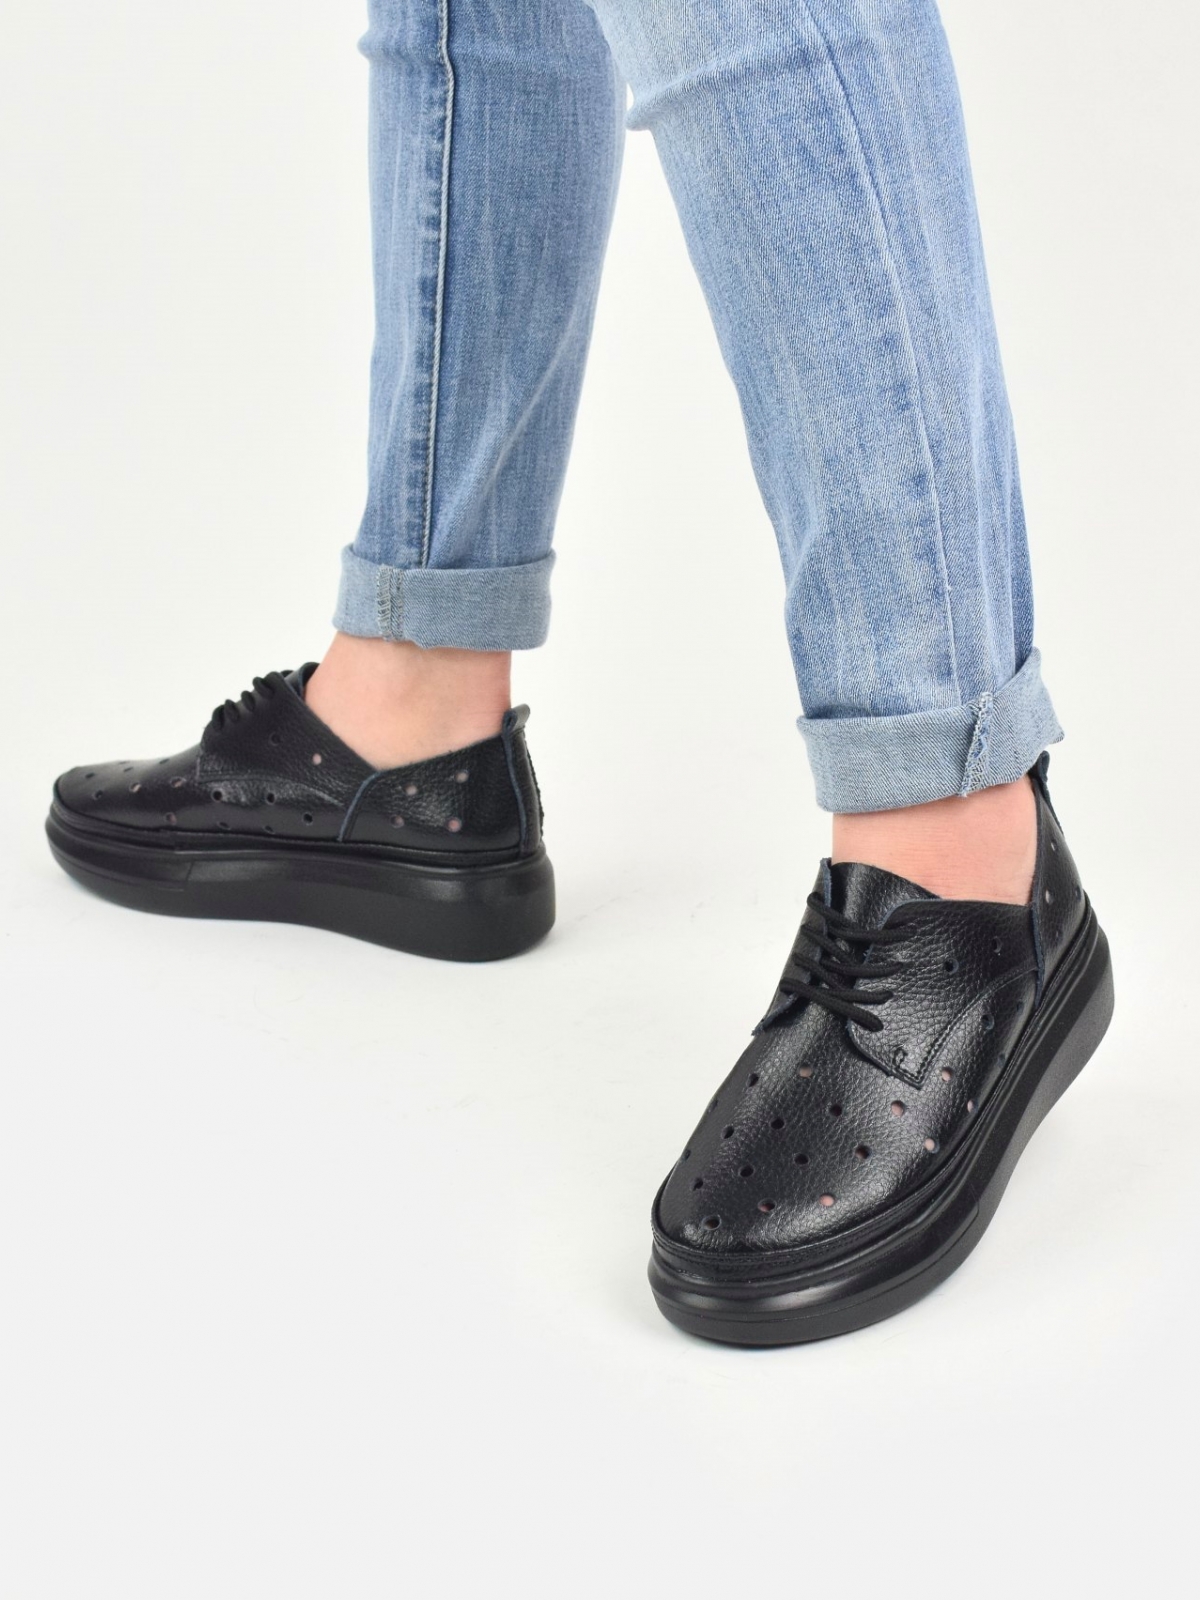 Genuine leather holed flat shoes in black